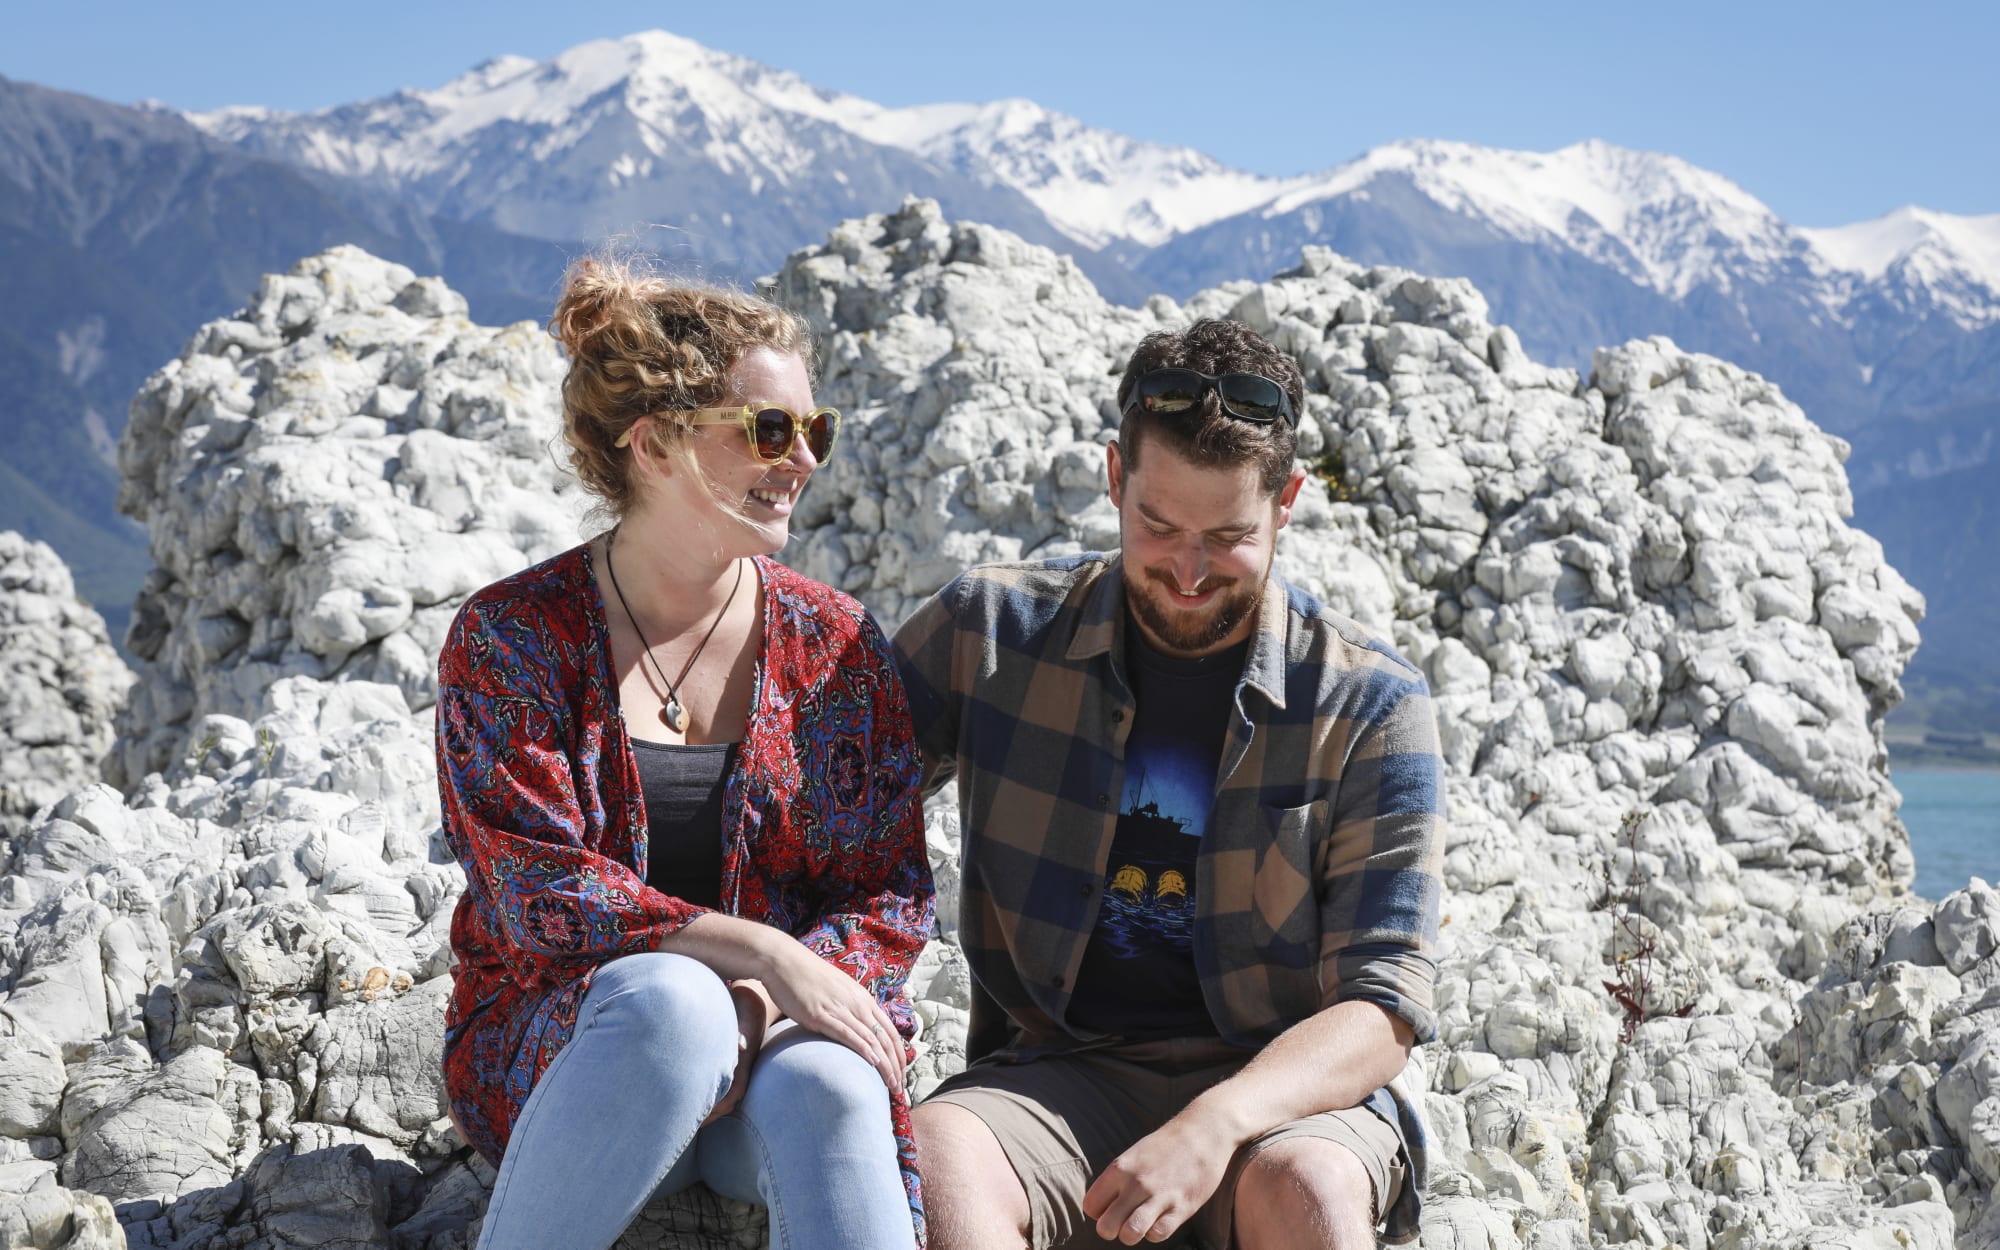 Jenny Worth and Nick Schofield, both from the UK were working for Encounter Kaikoura at the time of the earthquake. At the end of their visas they returned to the UK, arranged new visas and returned to Kaikoura.